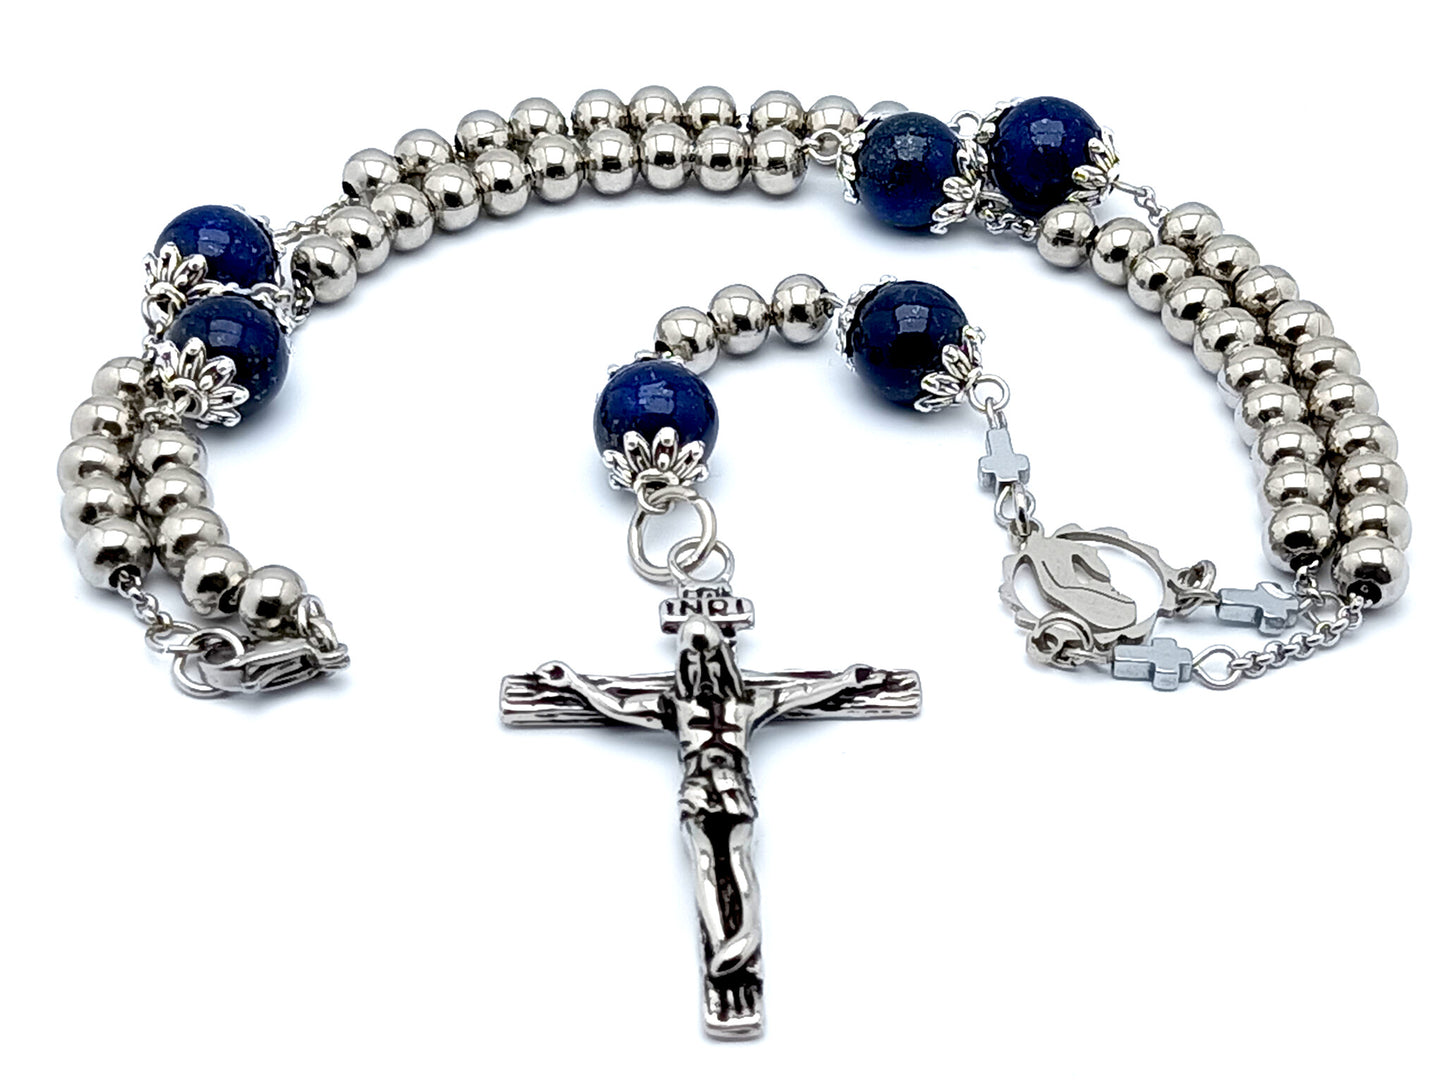 Virgin Mary unique rosary beads with lapis lazuli gemstone and stainless steel beads and stainless steel crucifix and clasp.